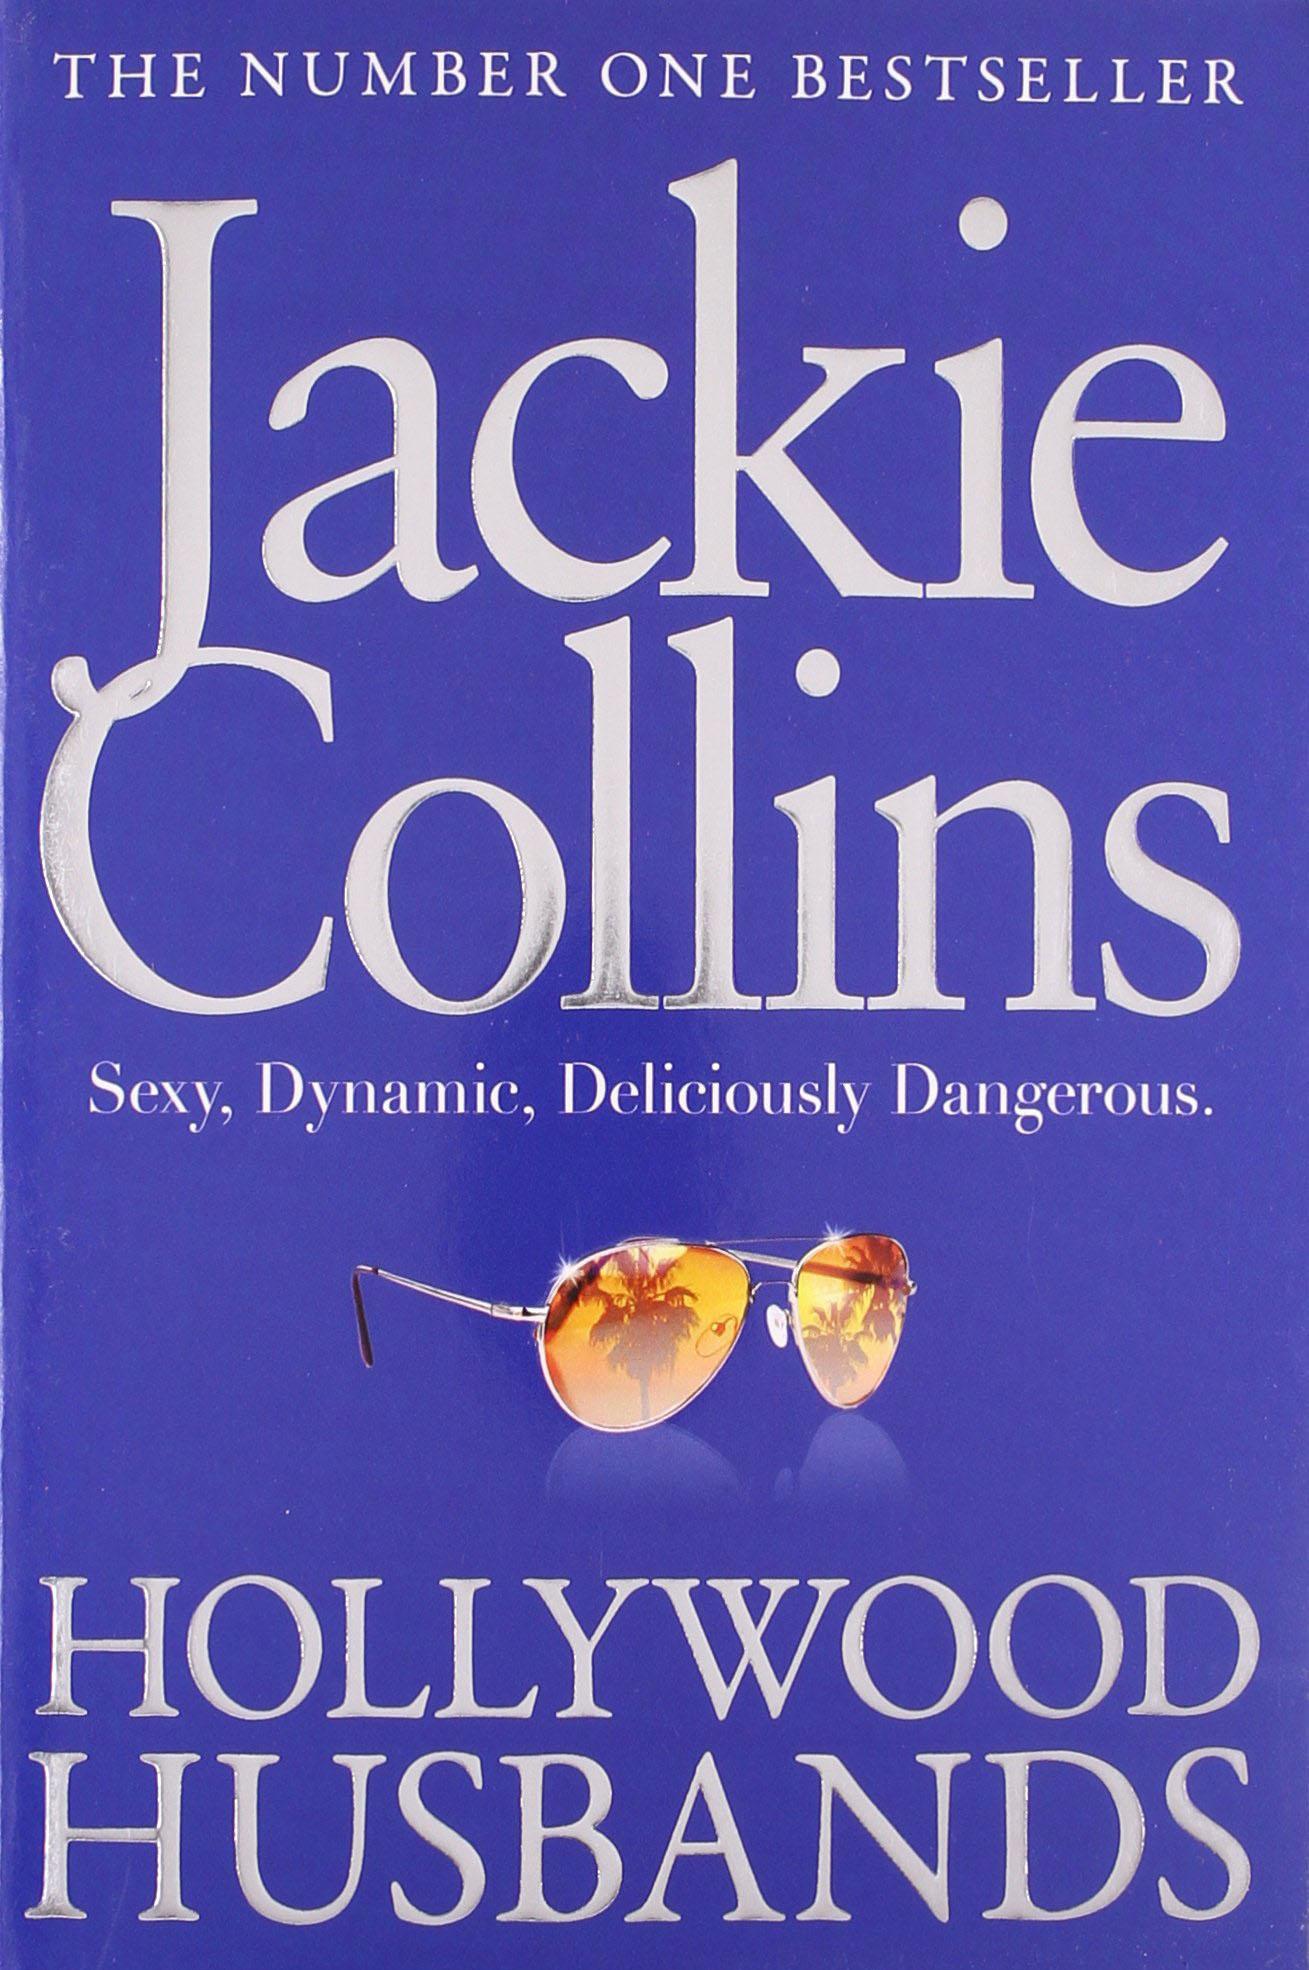 Collins insisted her research was done at real Hollywood parties